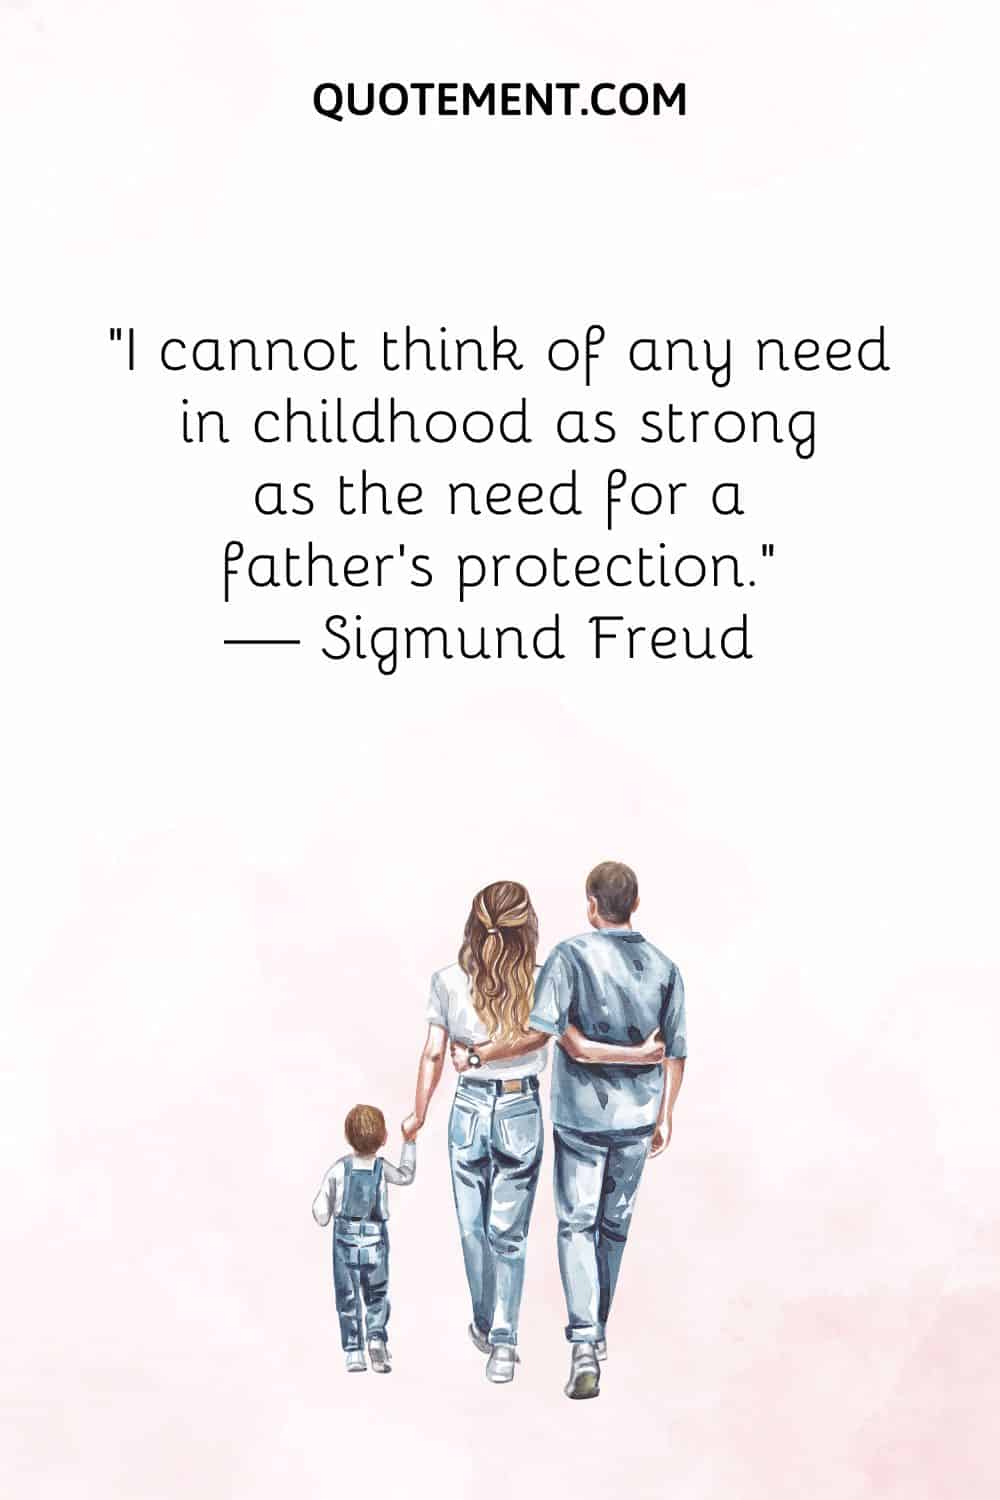 I cannot think of any need in childhood as strong as the need for a father’s protectio